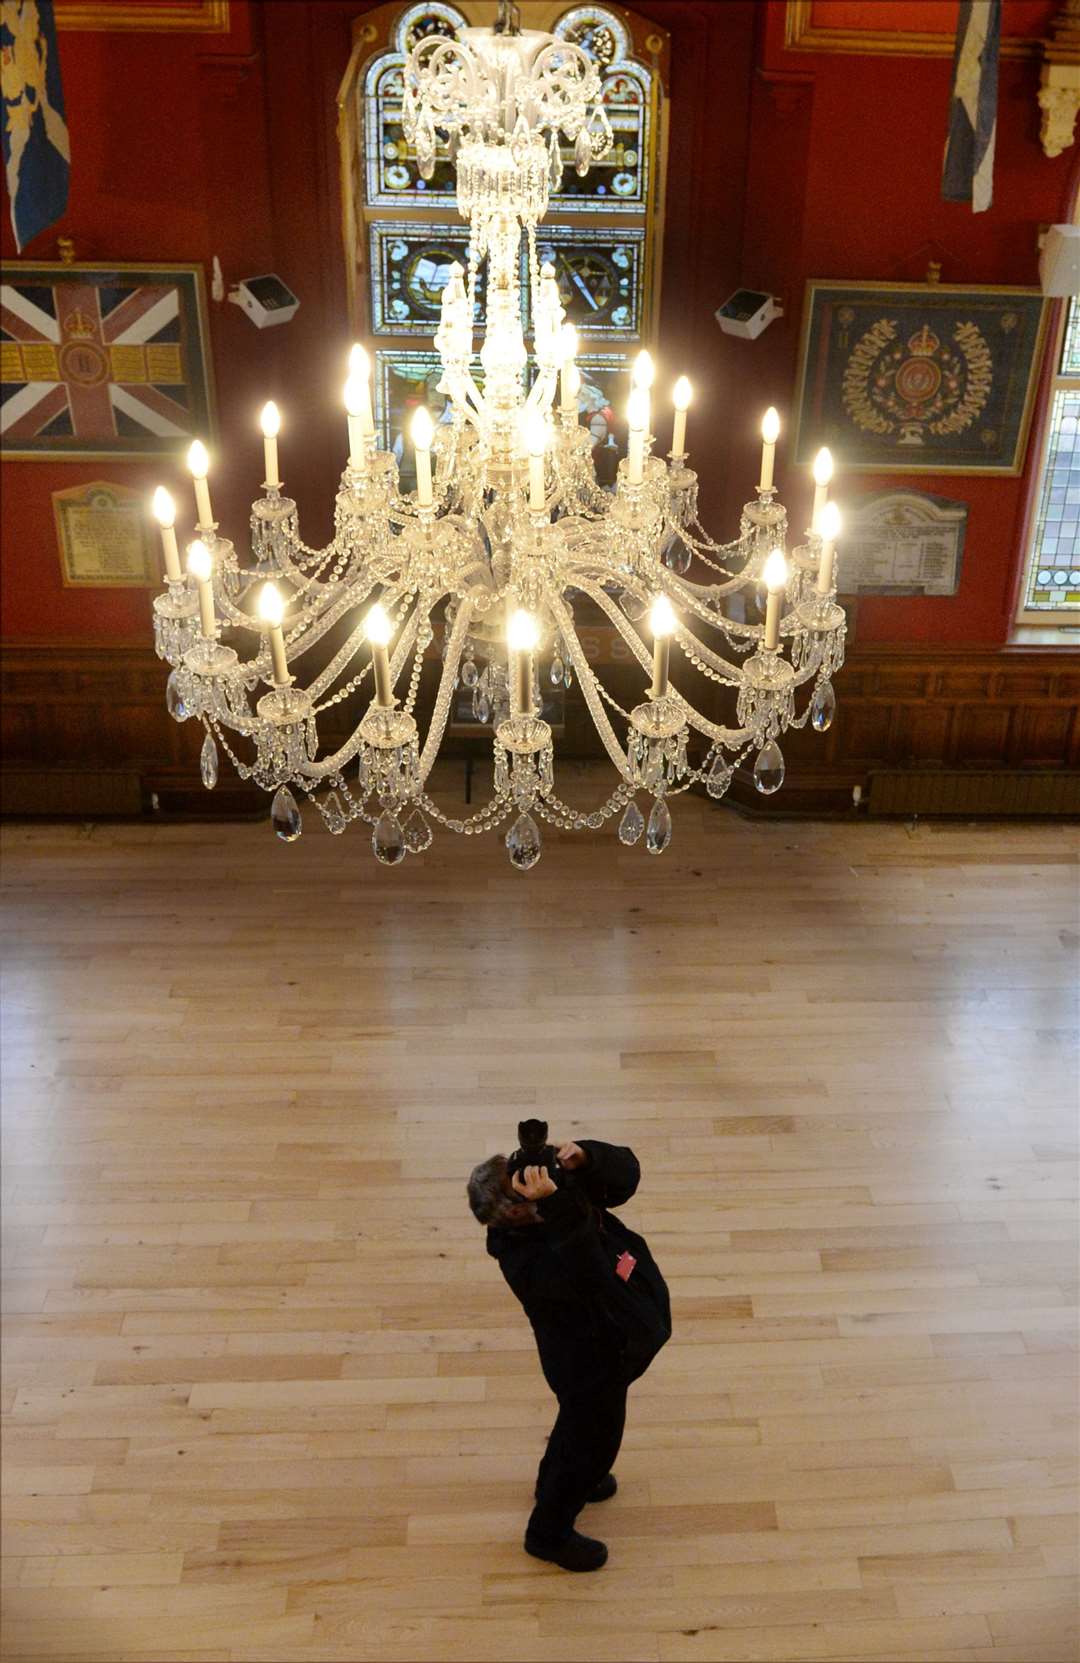 A chandelier in Inverness Town House.